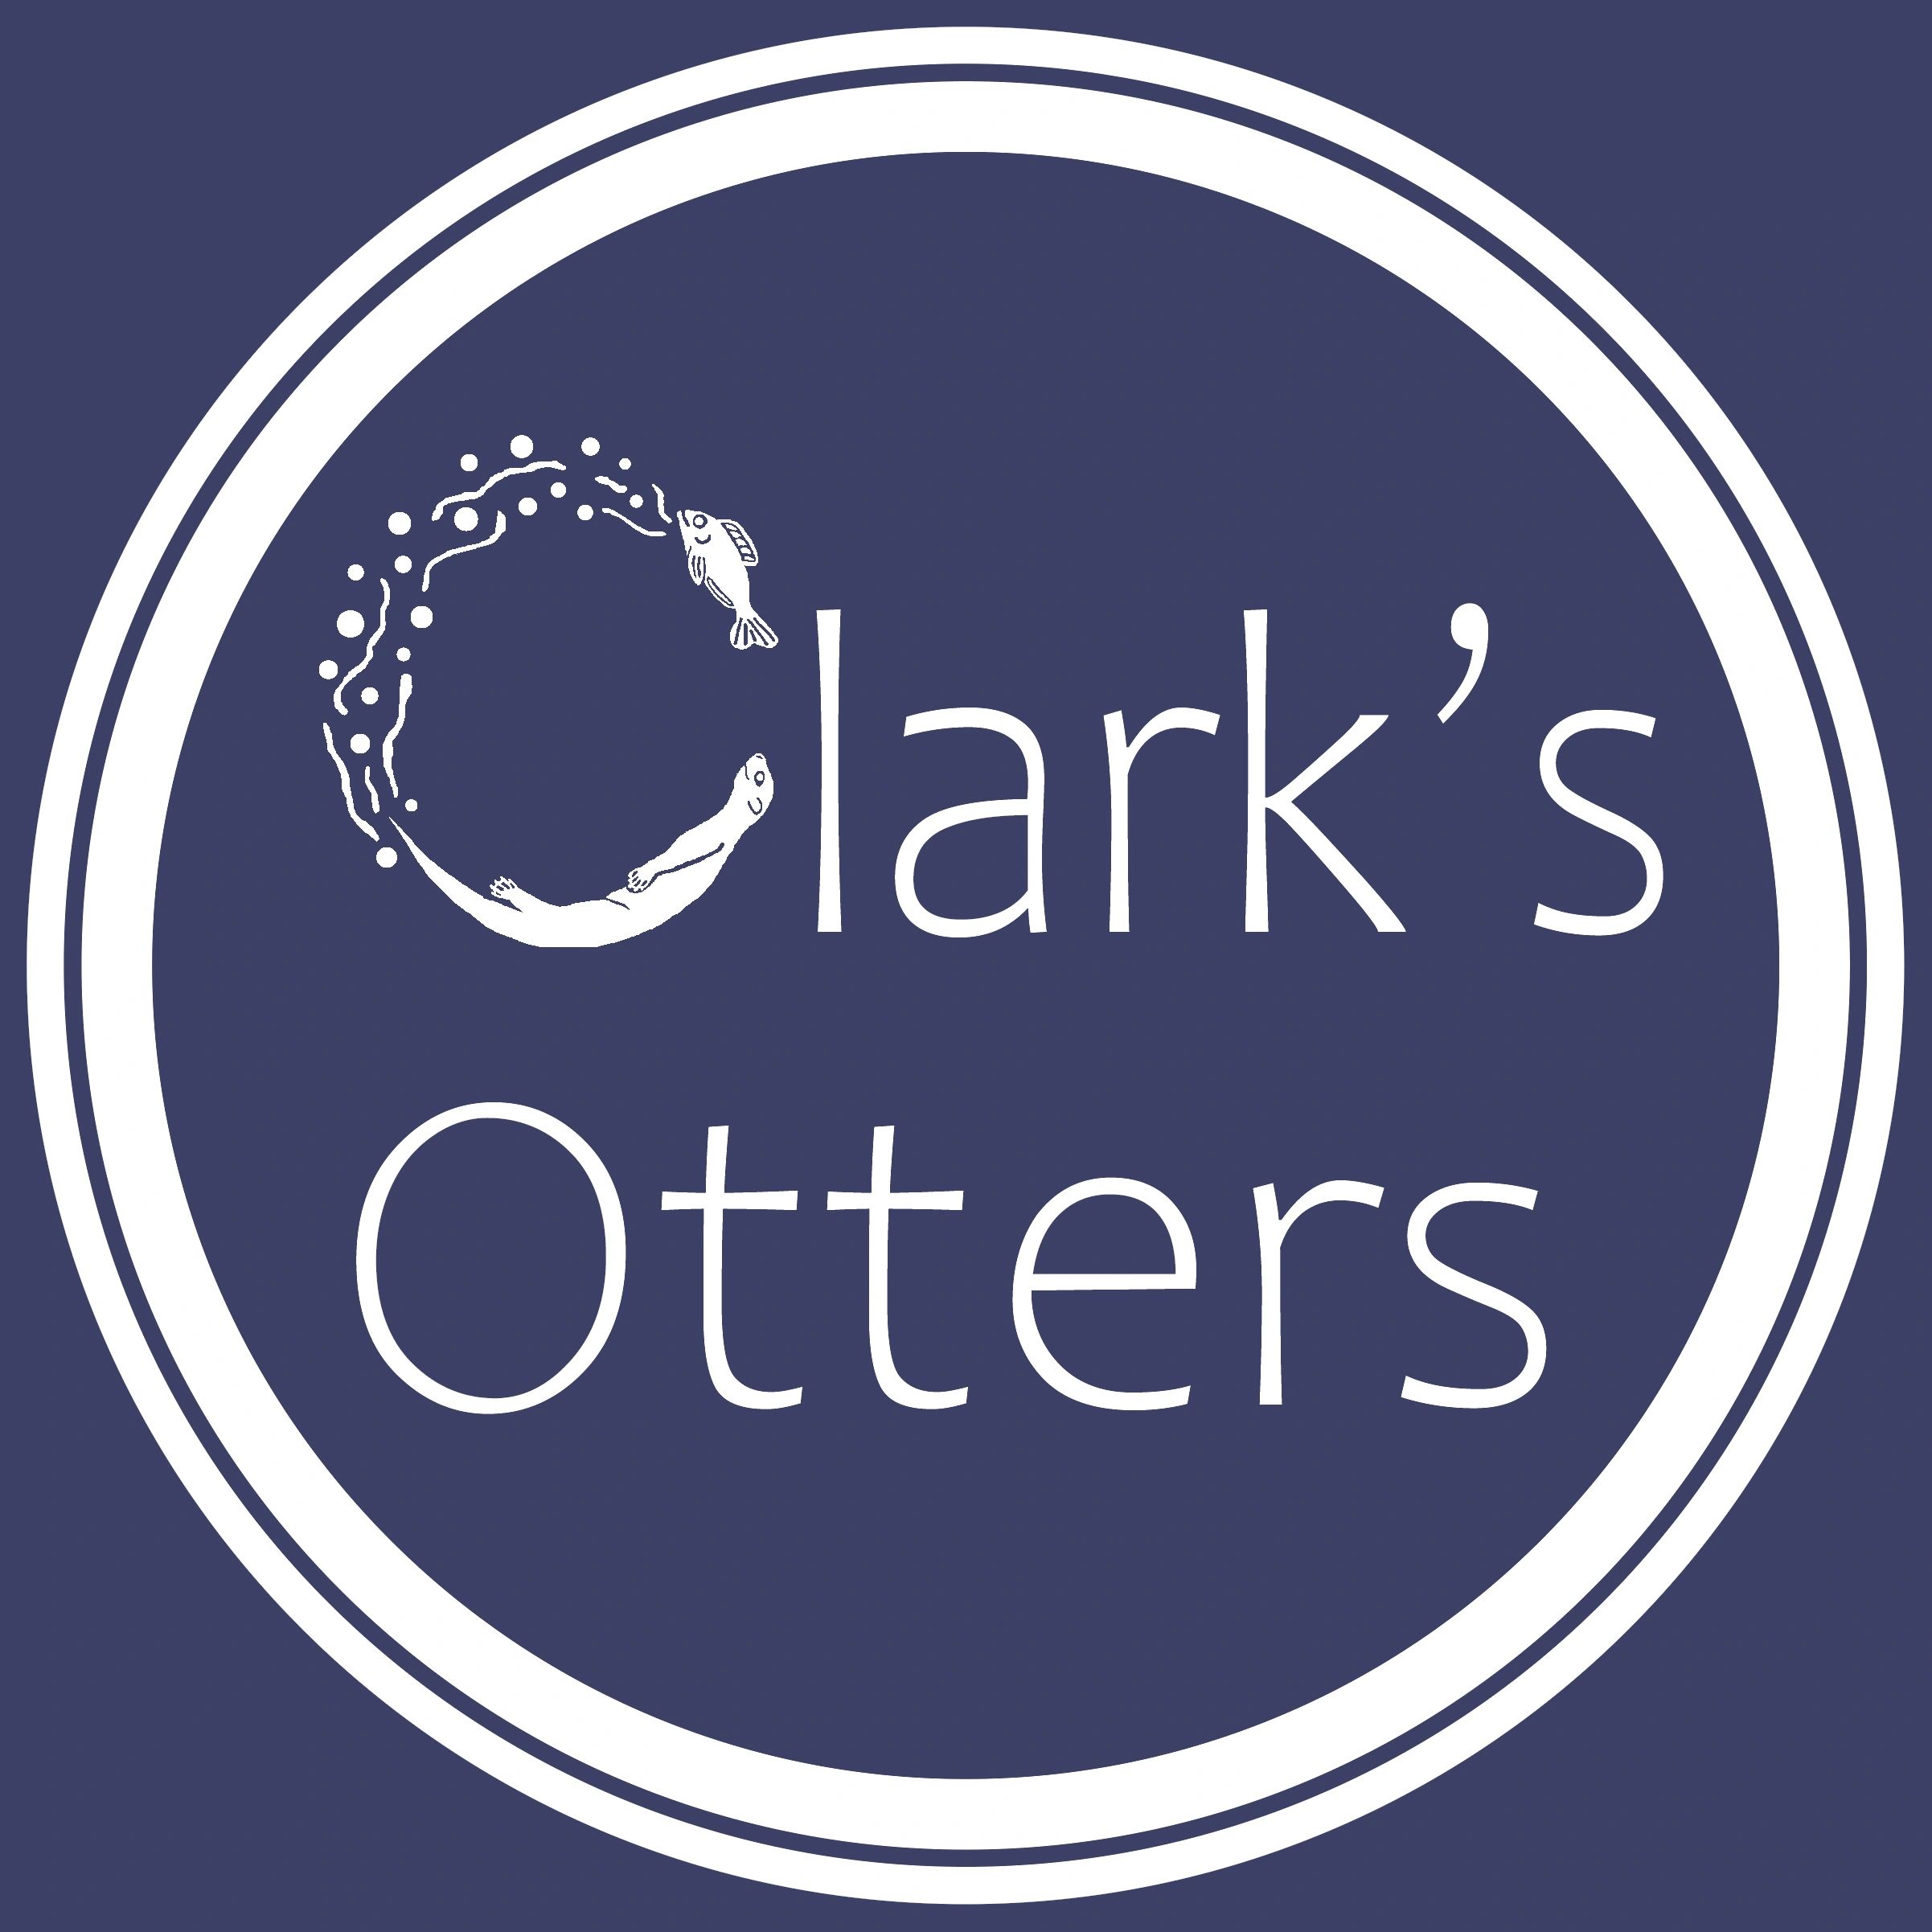 Clark's Otters - Home